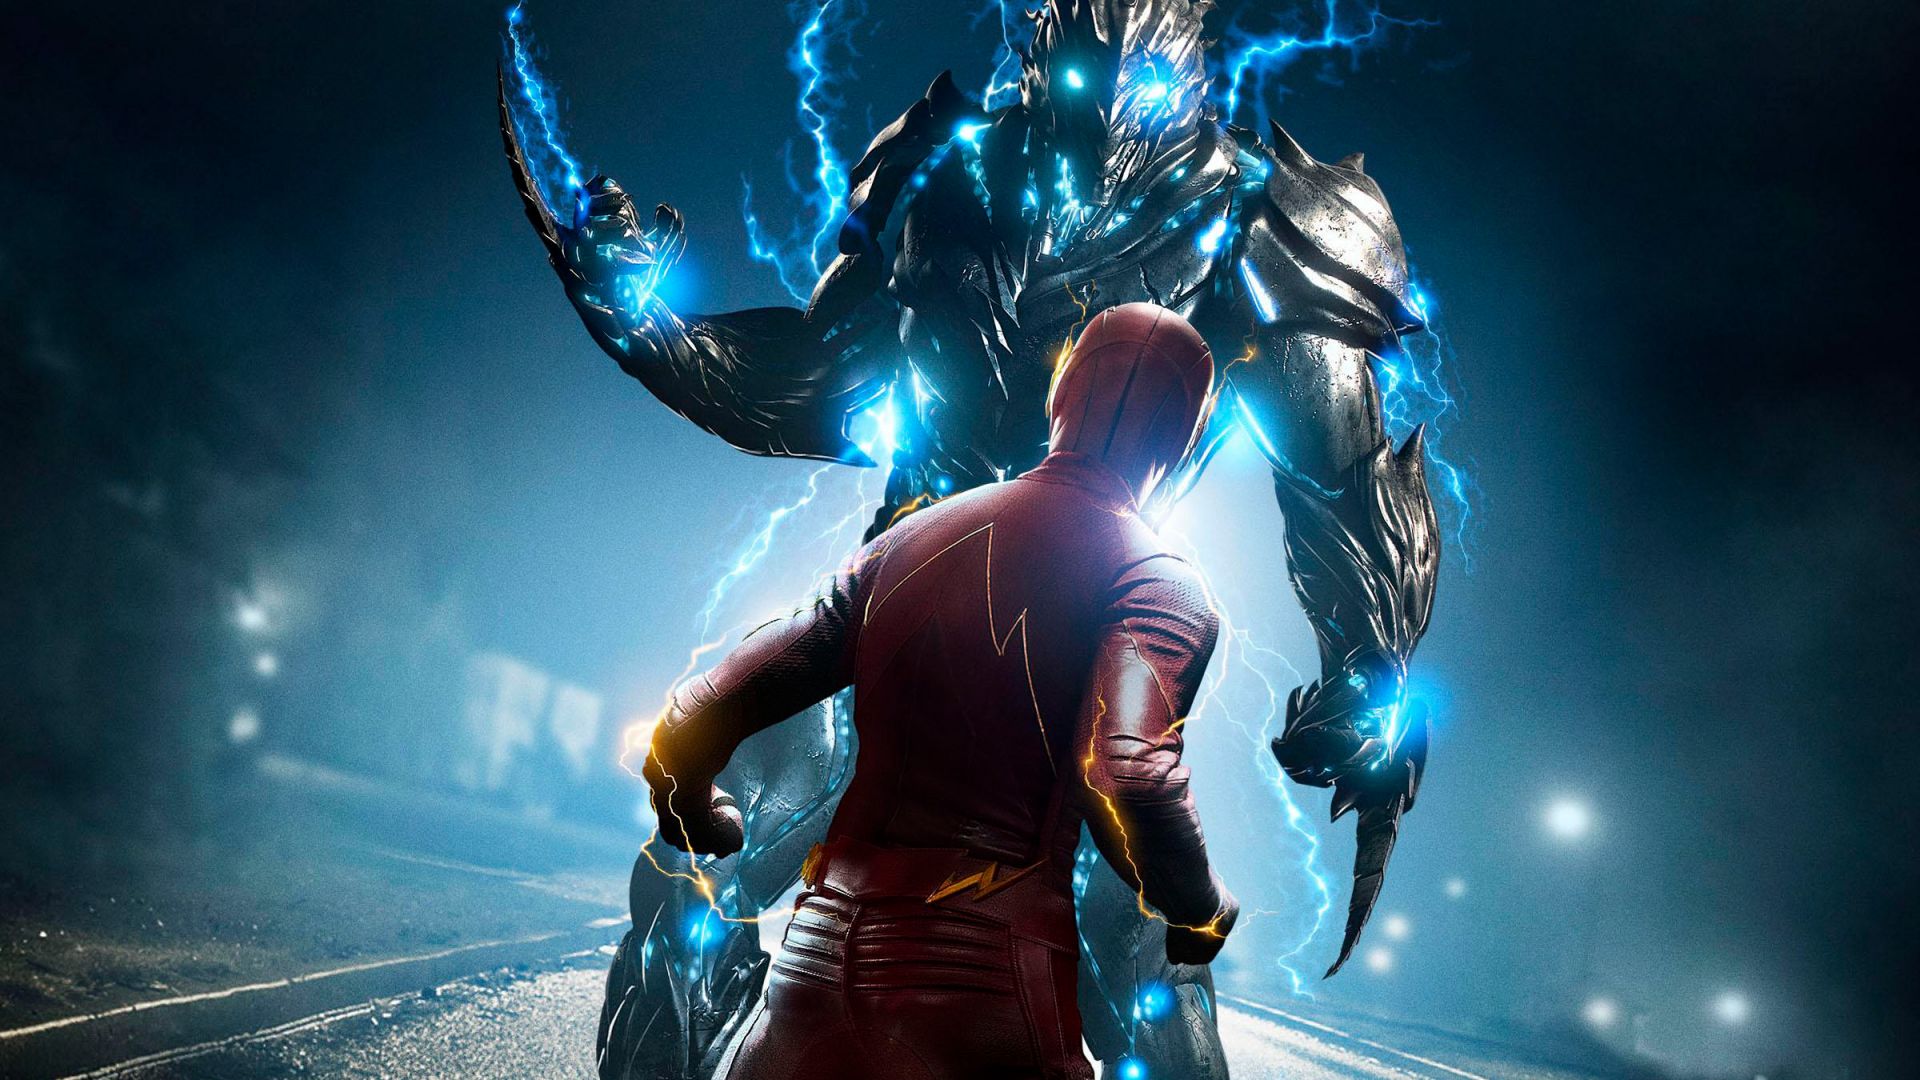 Wallpaper The Once and Future Flash, The Flash, TV show, Savitar, 2017